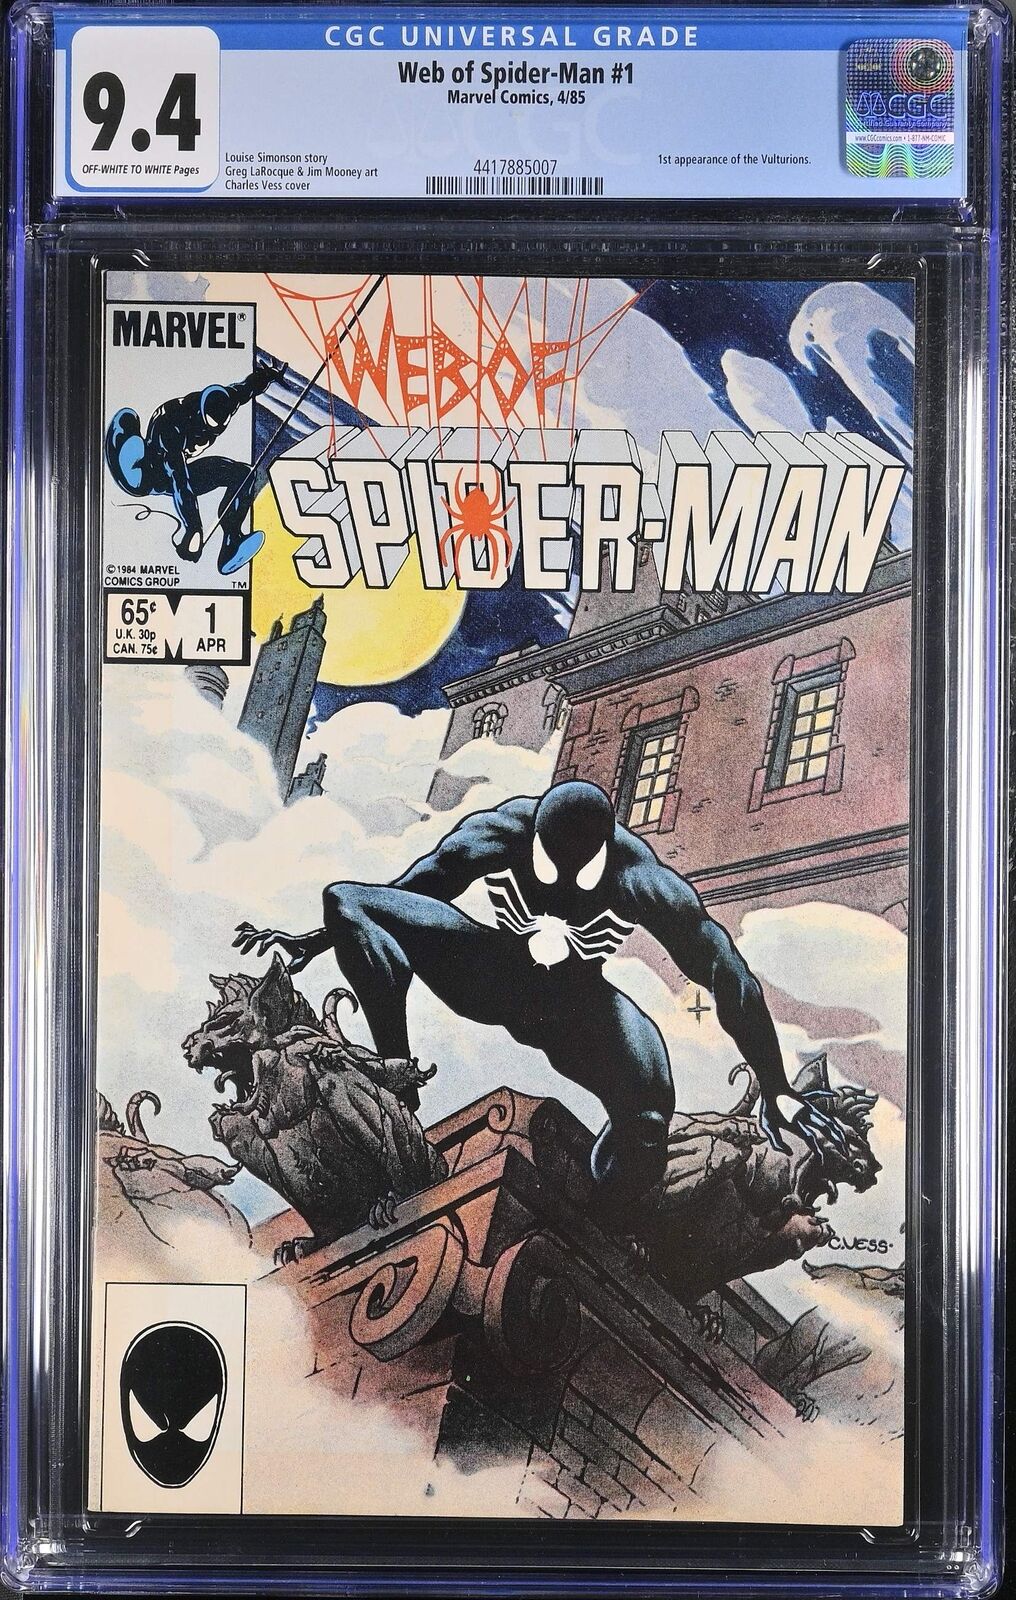 Web of Spider-Man #1 Marvel (1985) 9.4 NM CGC Graded Key Issue Comic Book